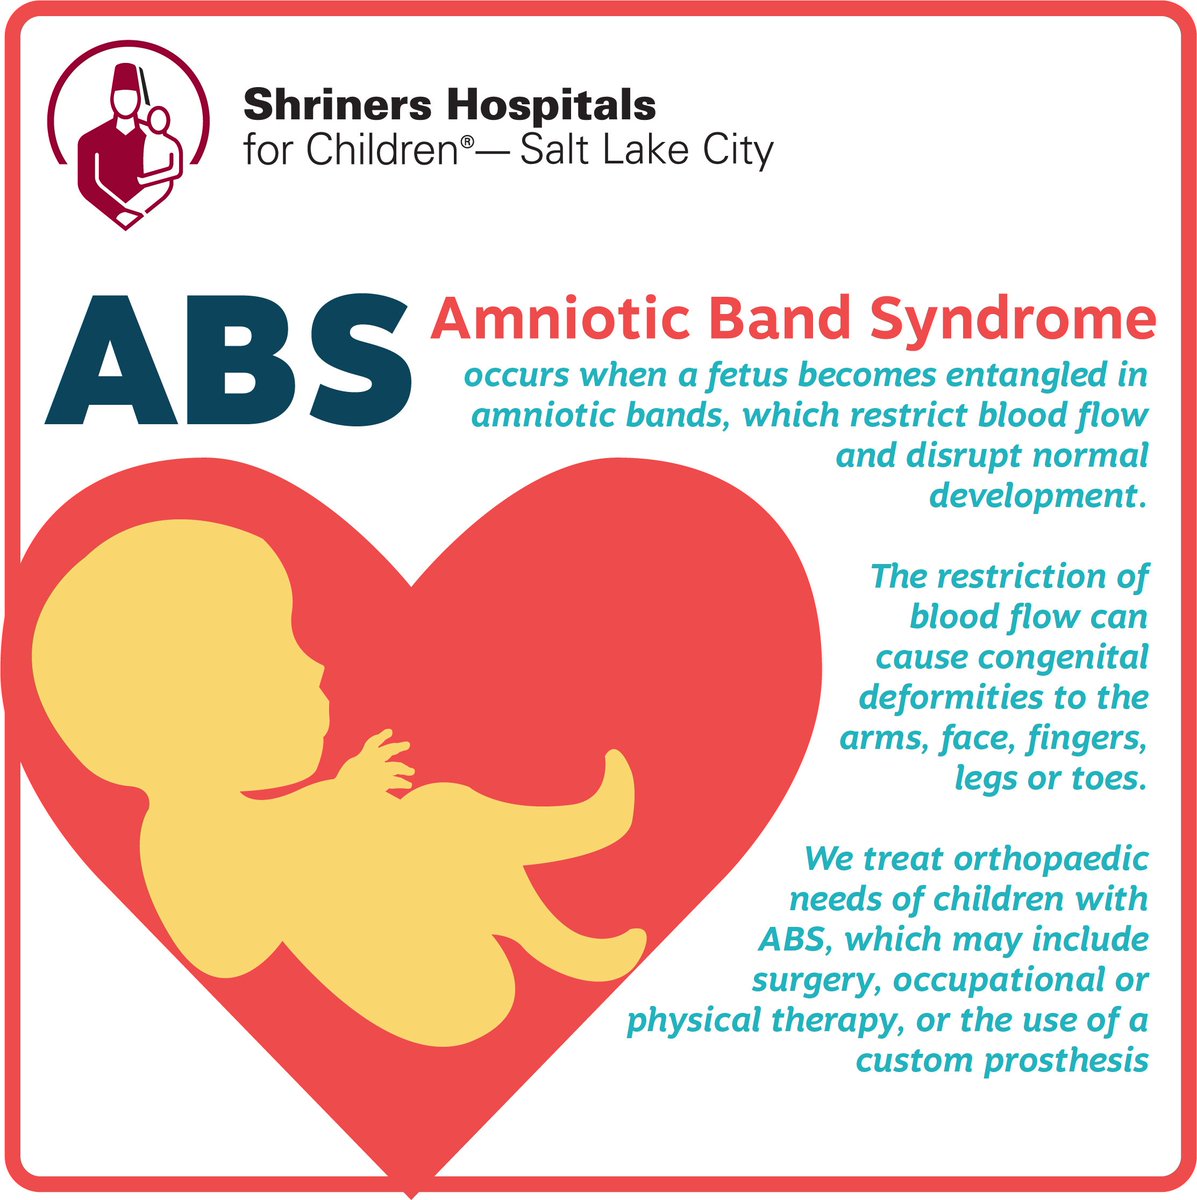 #amnioticbandsyndrome is a rare condition, but doesn't have to be frightening. We see kids thriving everyday! #shrinershospitalSLC #ABS